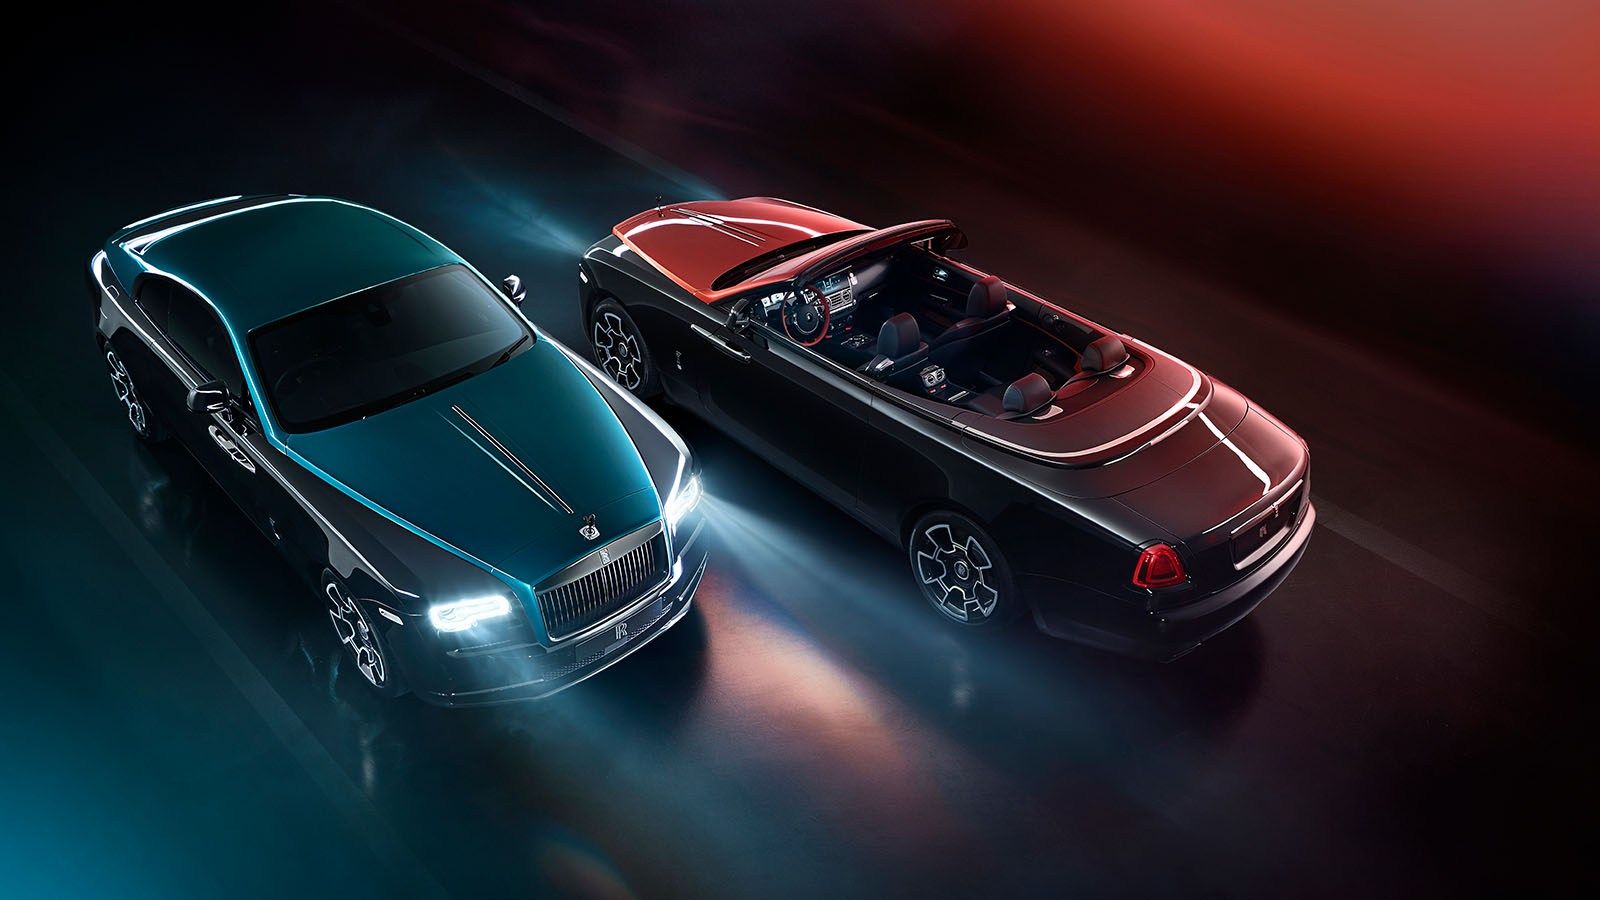 Rolls Royce Presents Adamas Collection With Carbon Fiber Spirit Of Ecstasy & Parts News